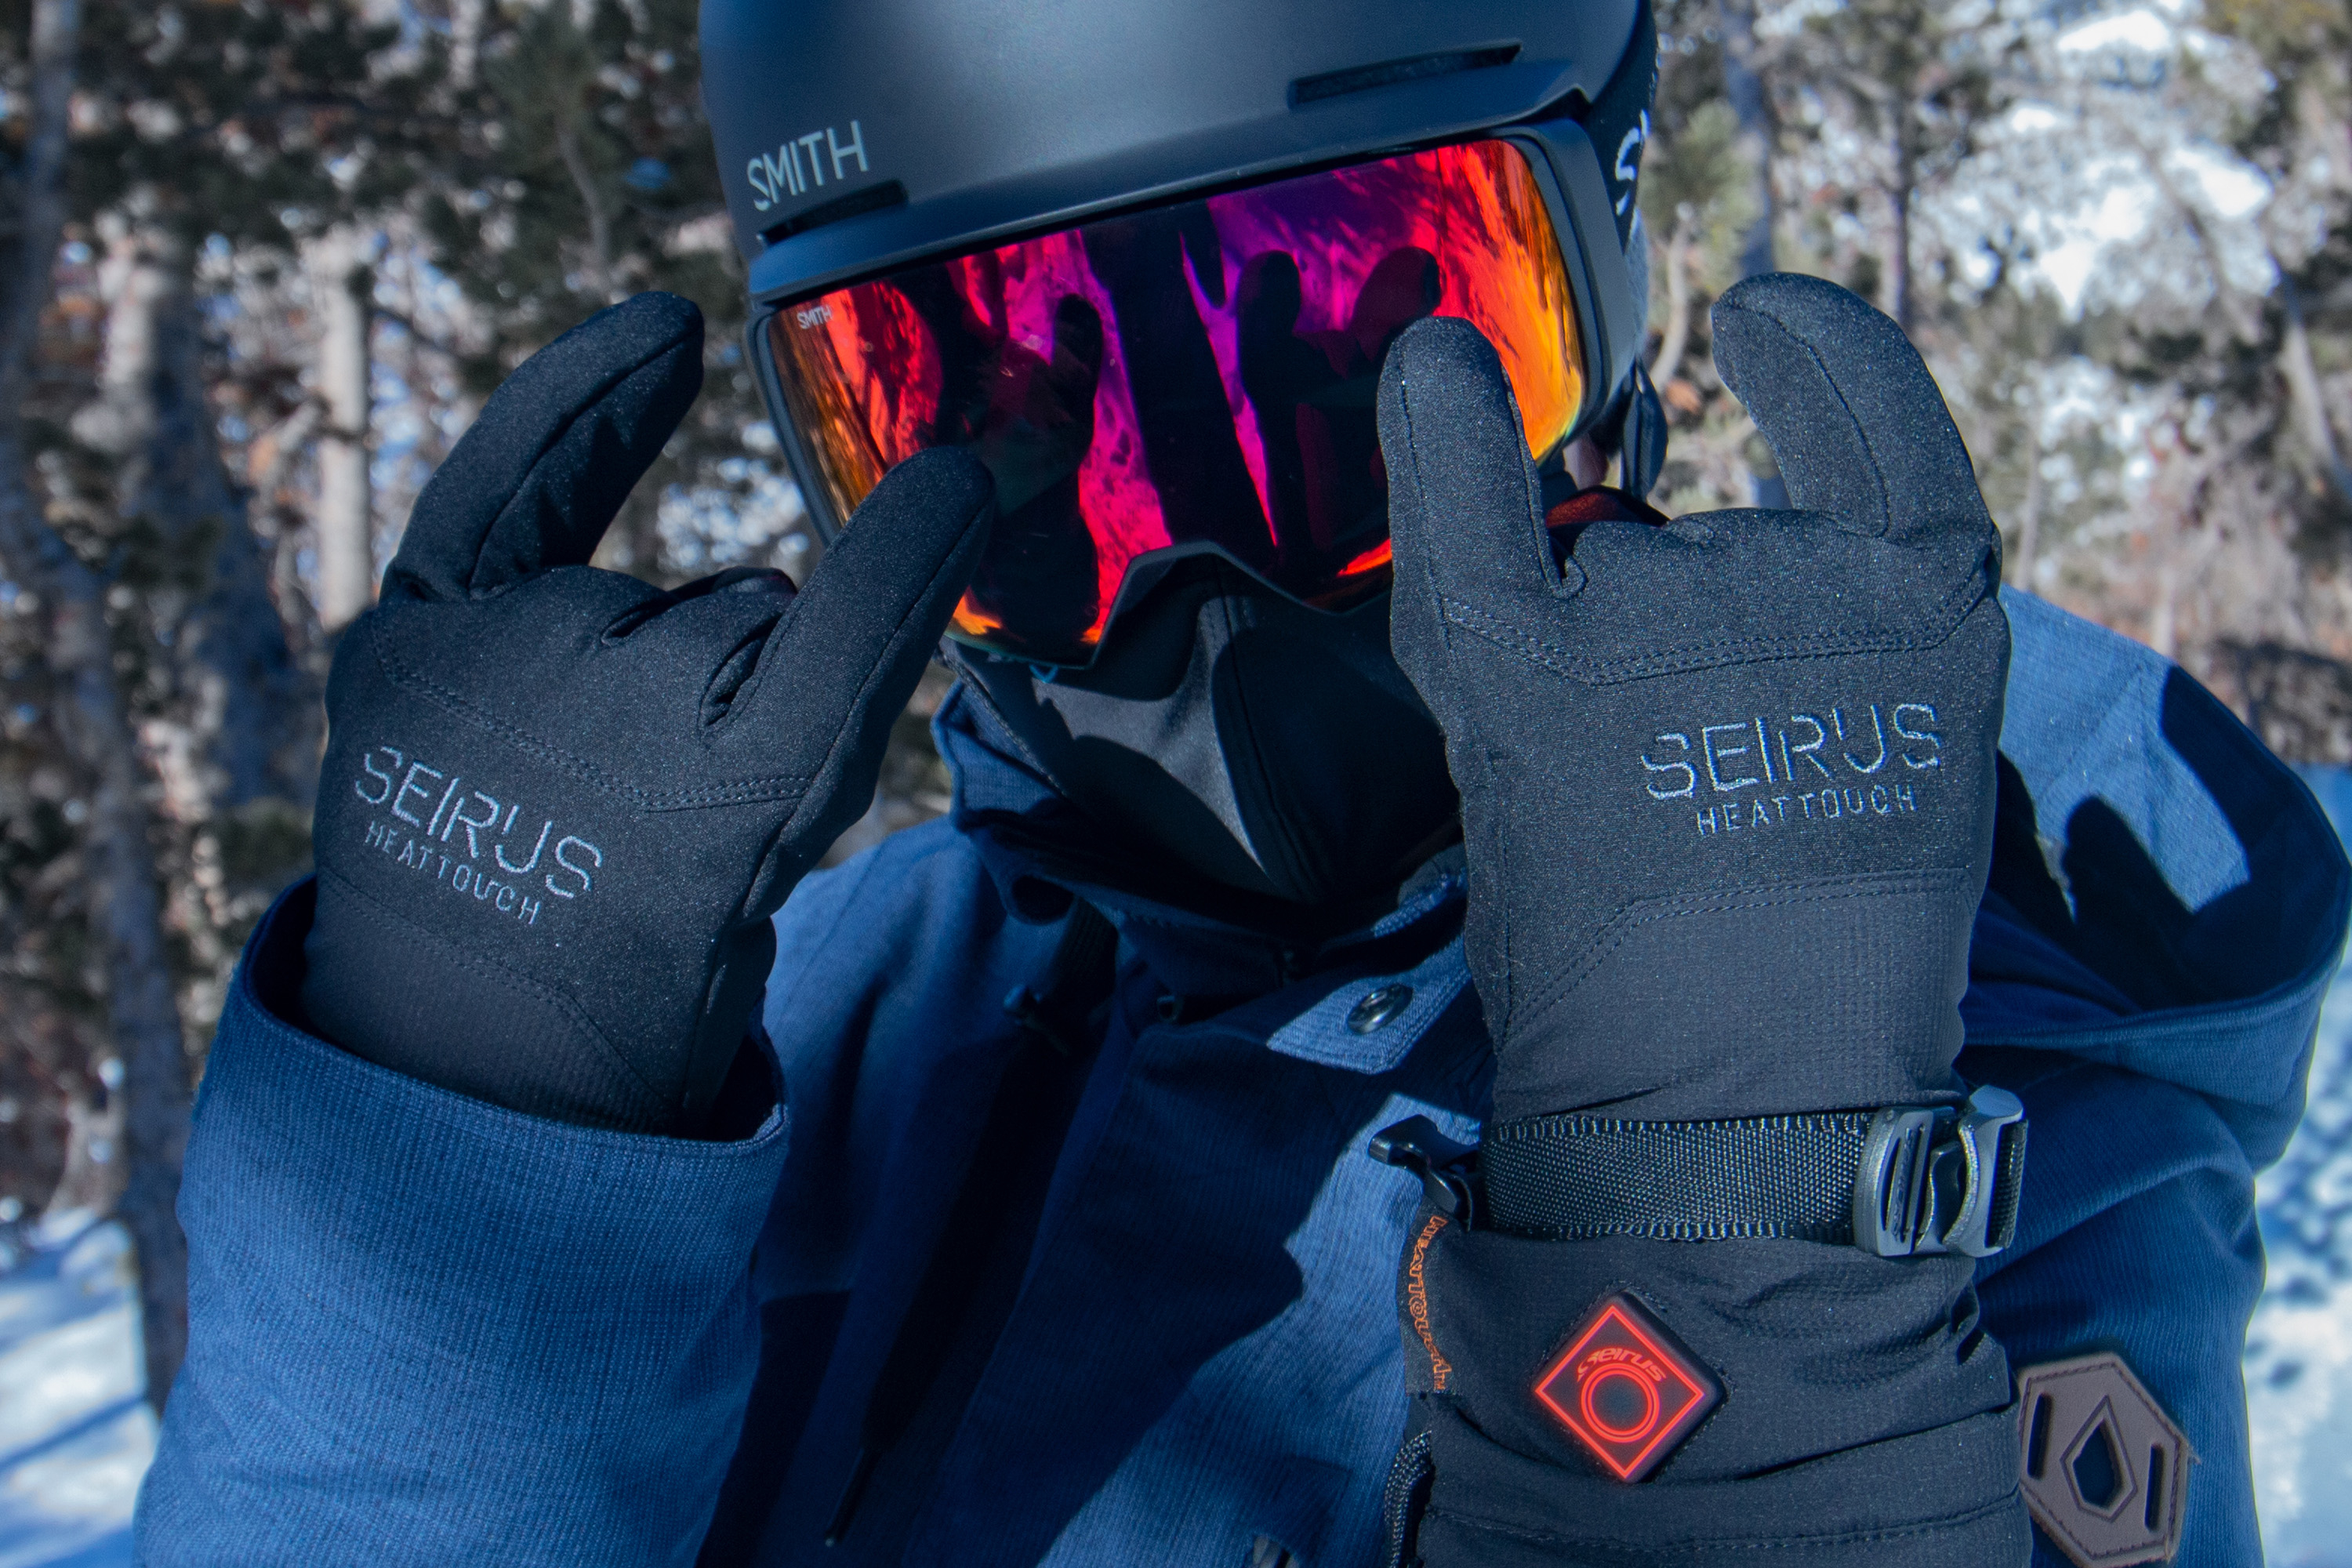 Free Gear Fridays: Win a Prize Pack of Cold Weather Gear From Seirus